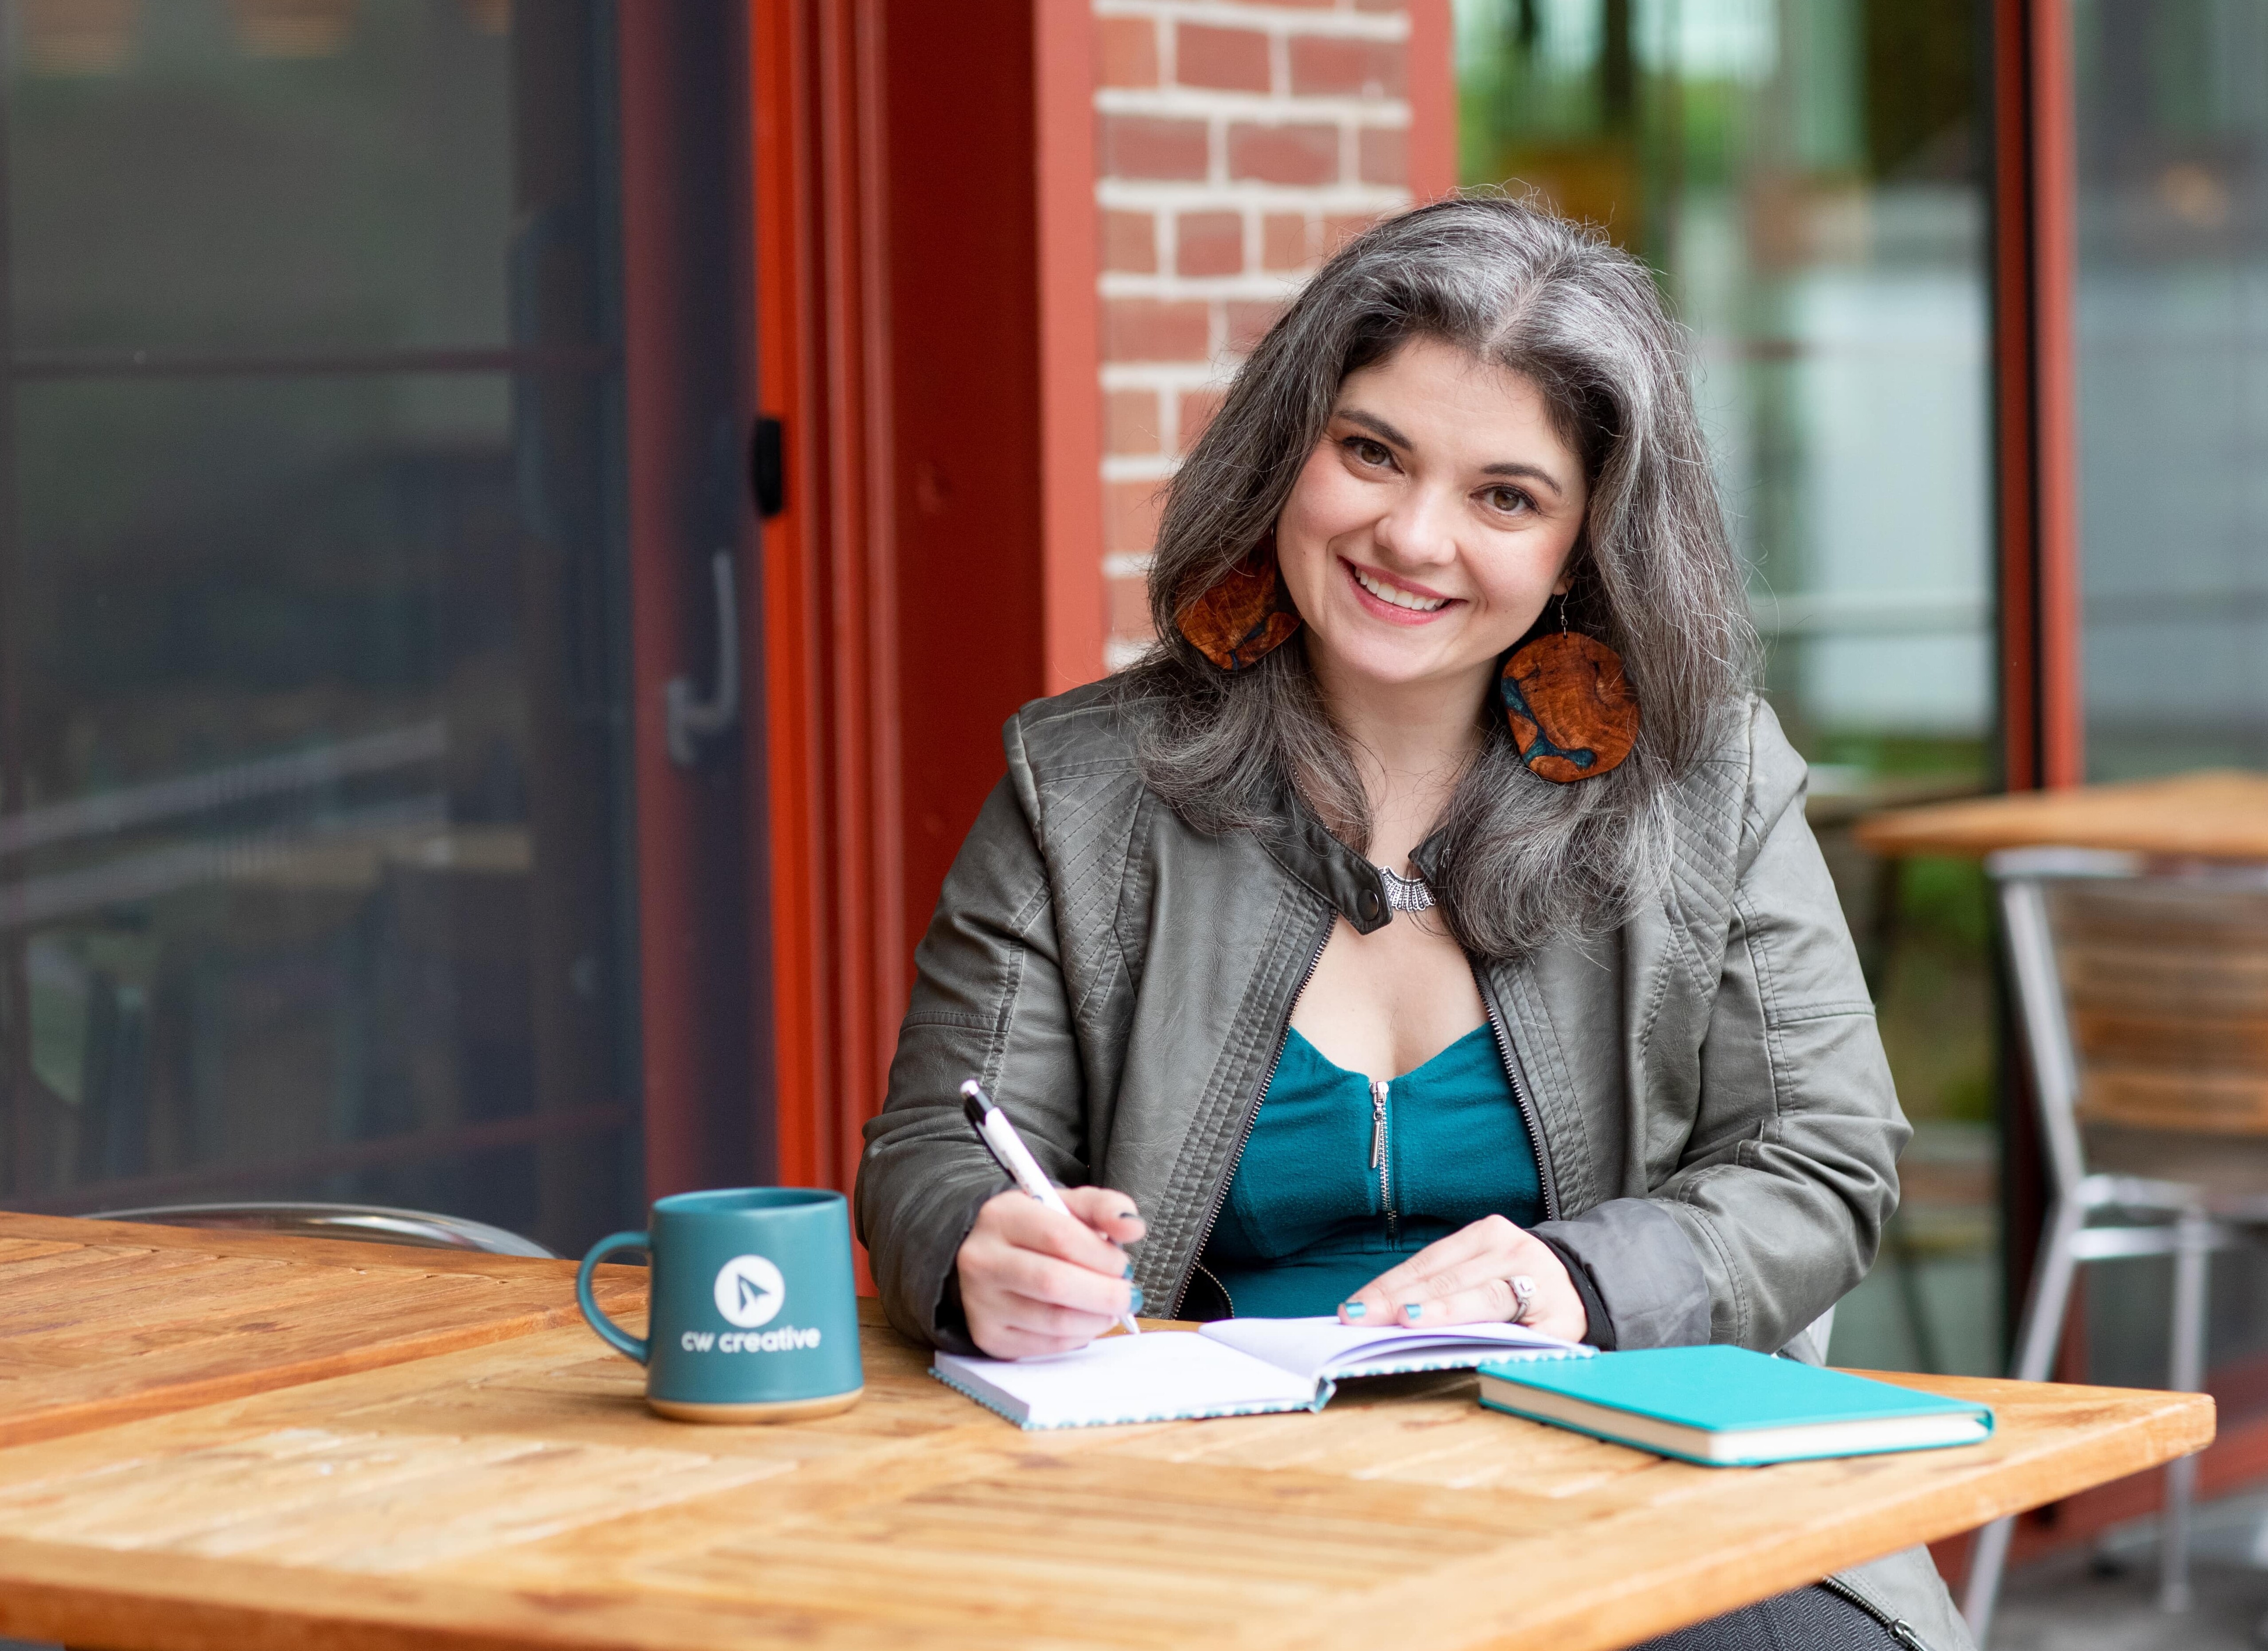 Mollie Lannen sitting at a table with CW Creative coffee cup